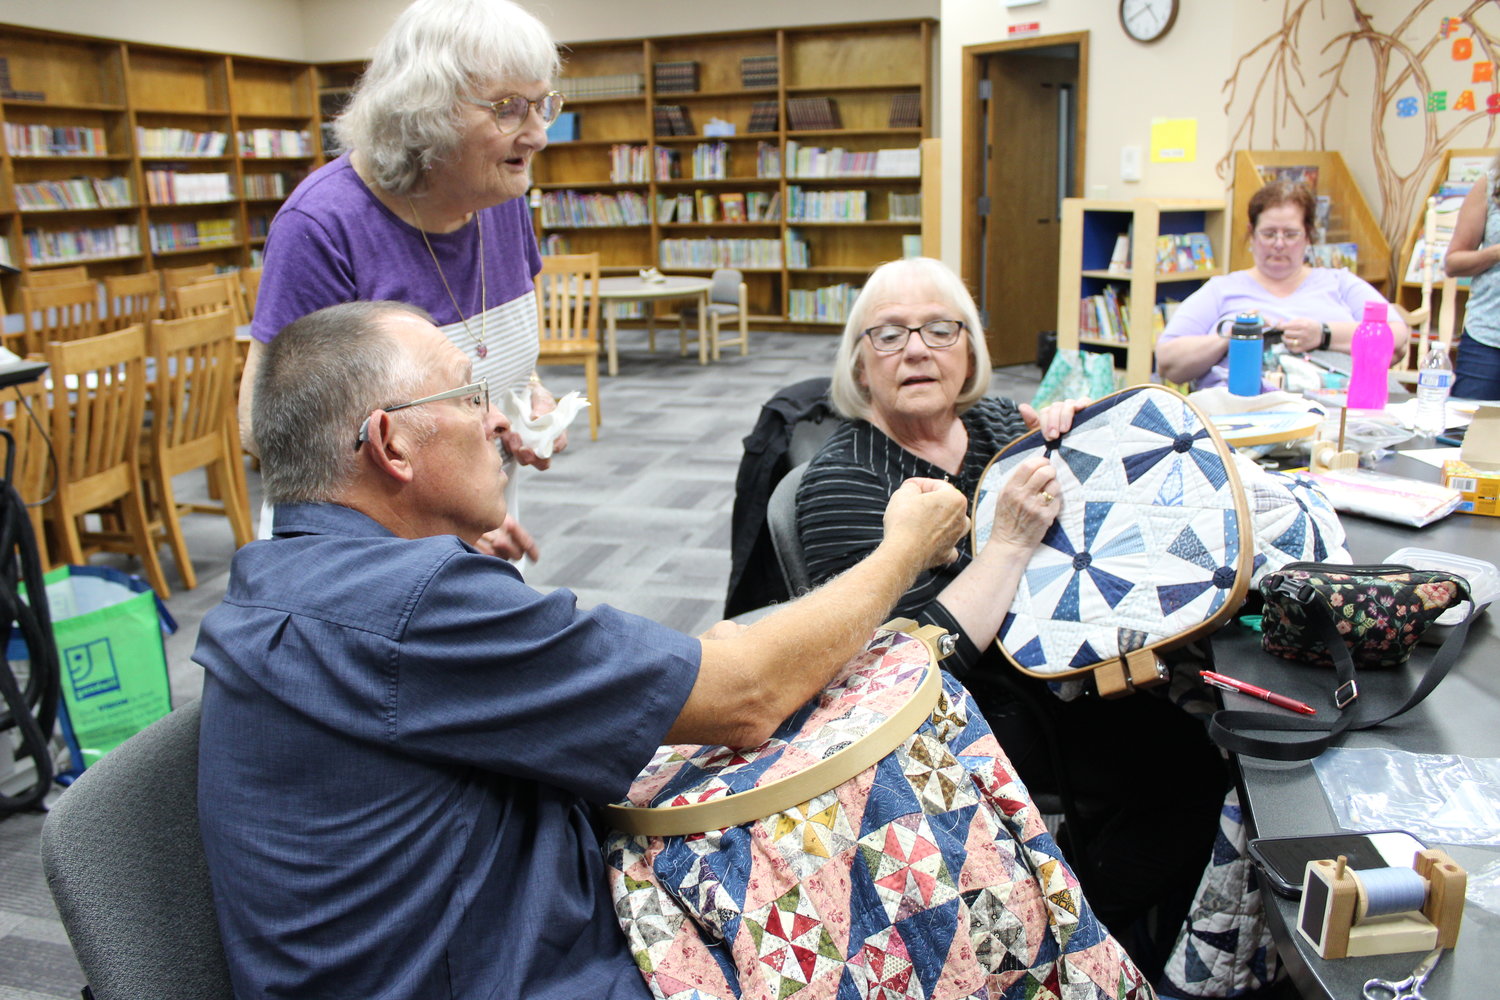 Rick Sundstrom shows an incredibly small quilting needle to Judy Cobd and Susy Carpenter during a meetup of the In Stitches quilting group, which will hold its final public show Sept. 30 and Oct. 1 at Centralia Christian School.